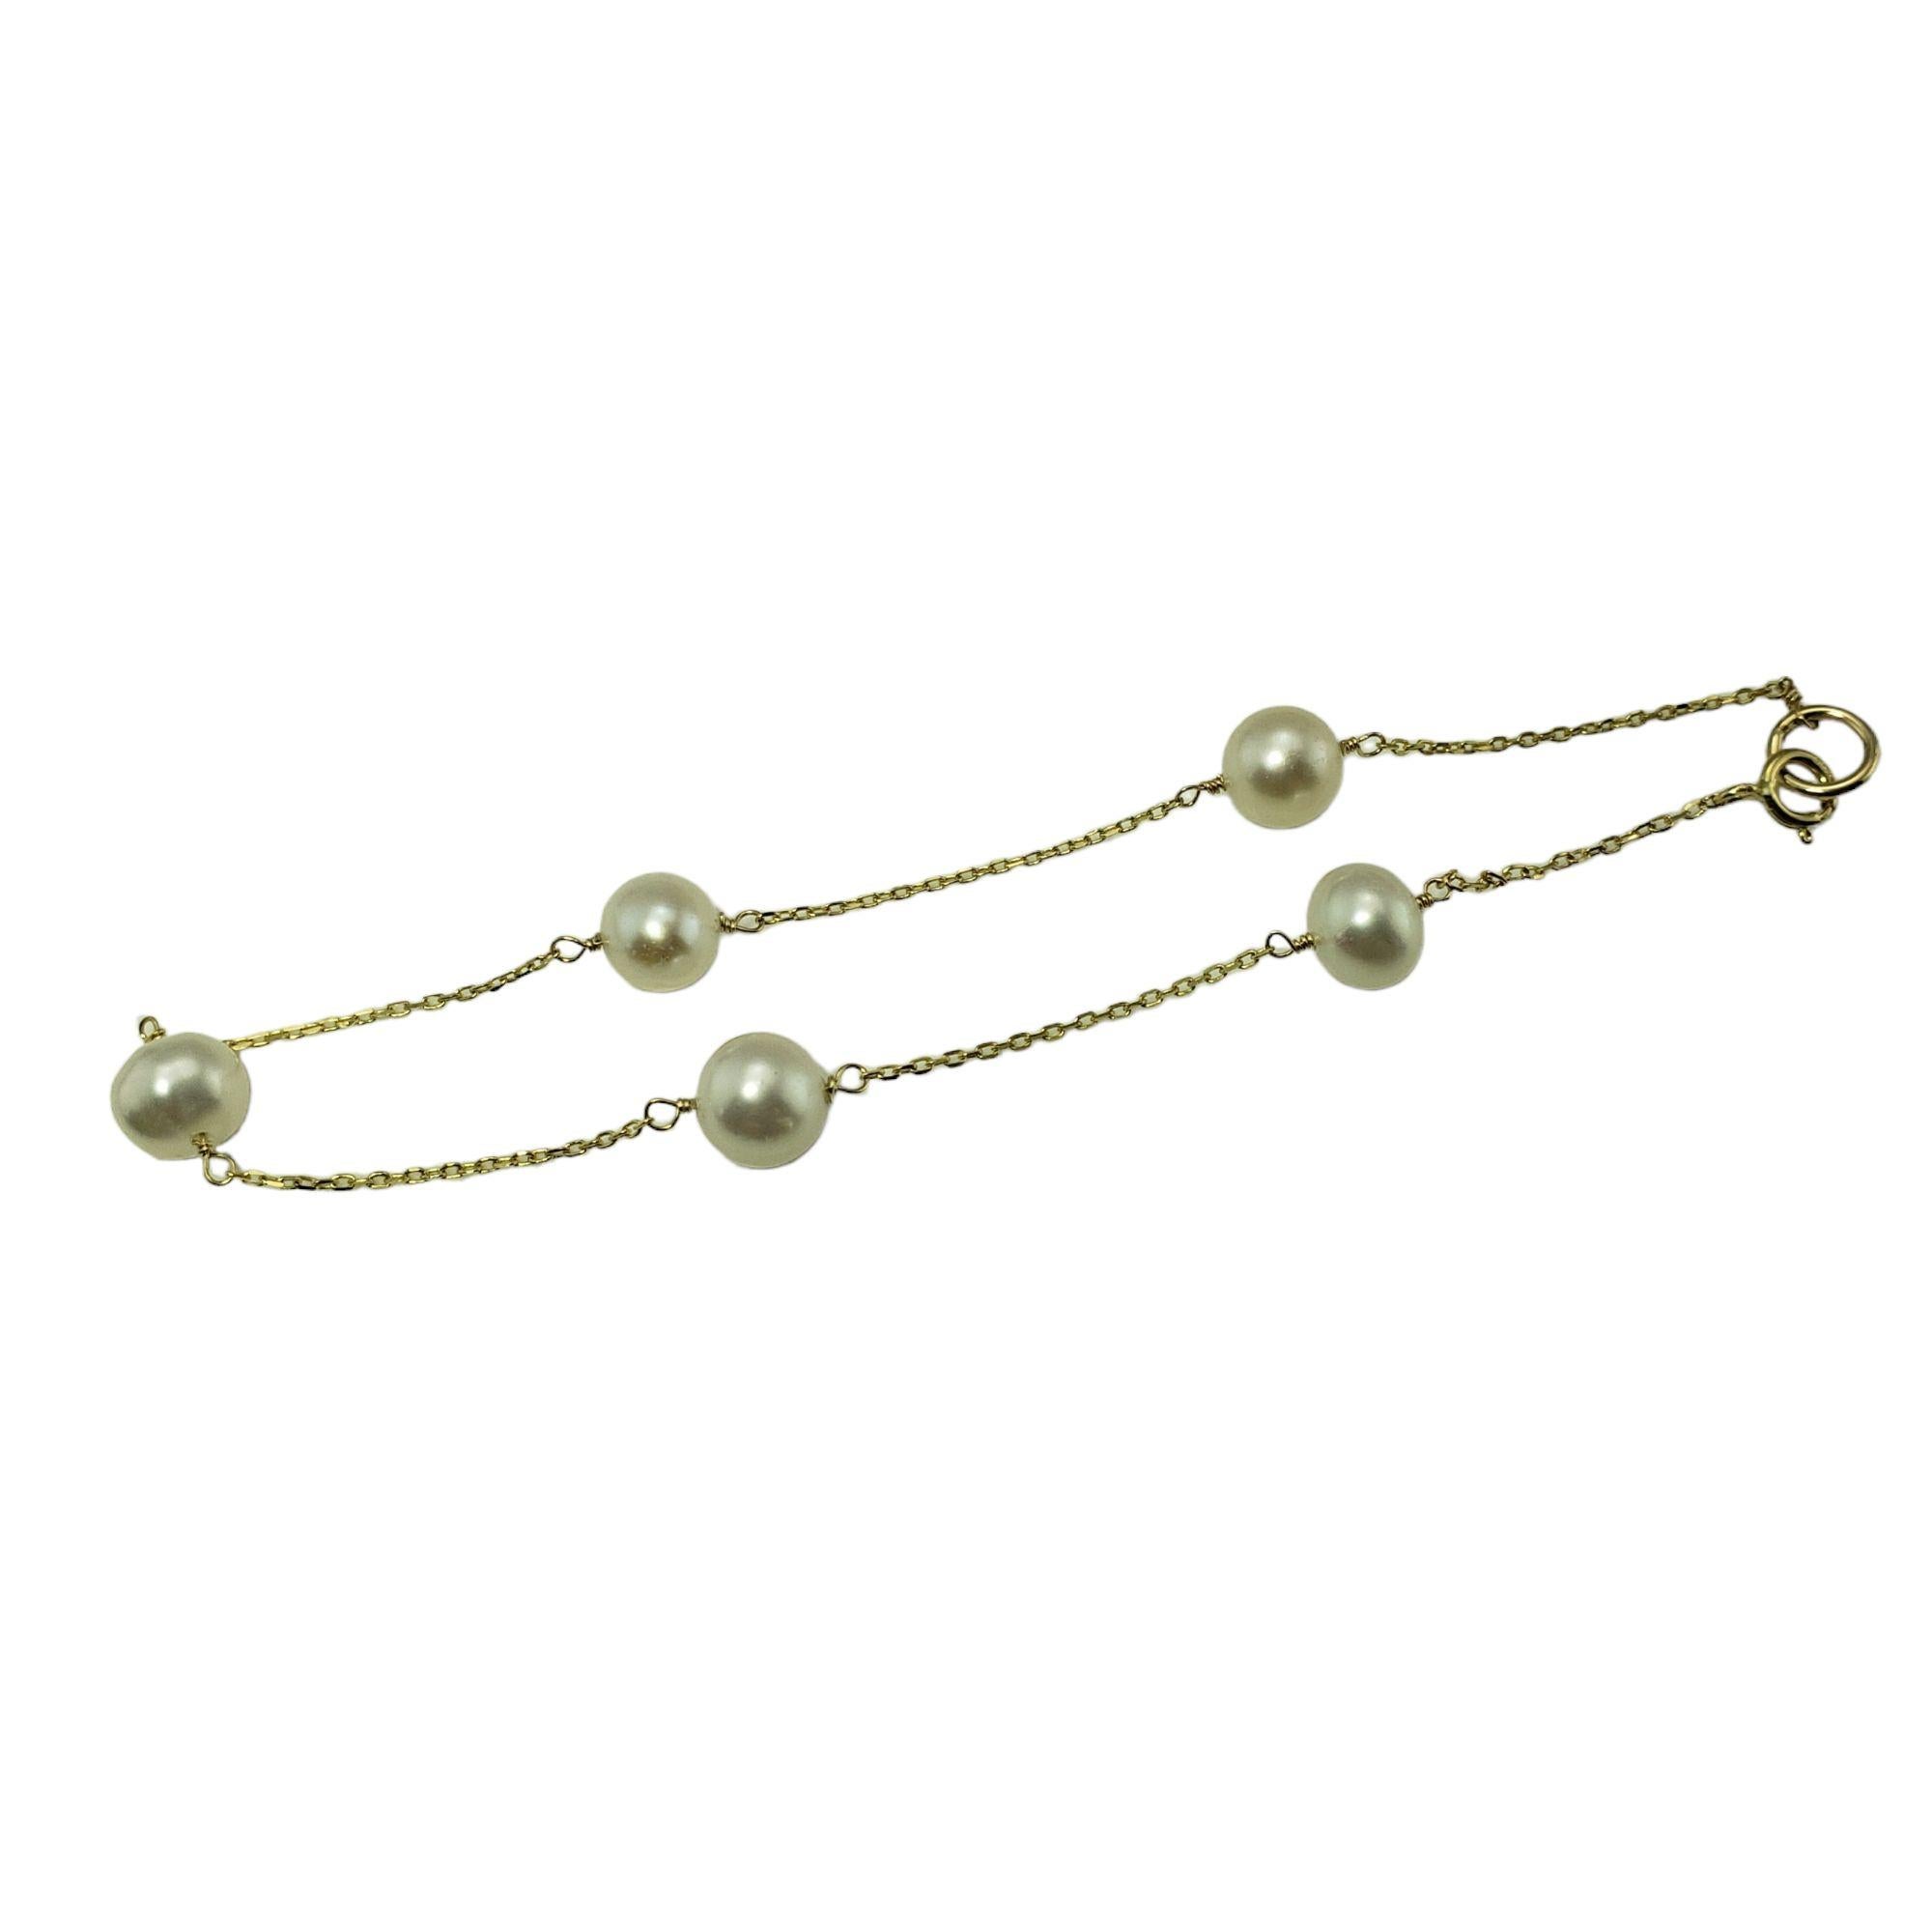 Vintage 14 Karat Yellow Gold and Pearl Bracelet-

This lovely station bracelet features seven 6 mm white pearls set on a classic cable chain.

Size: 7 inches

Weight:  1.3 dwt. /  2.1 gr.

Stamped: 585

Very good condition, professionally